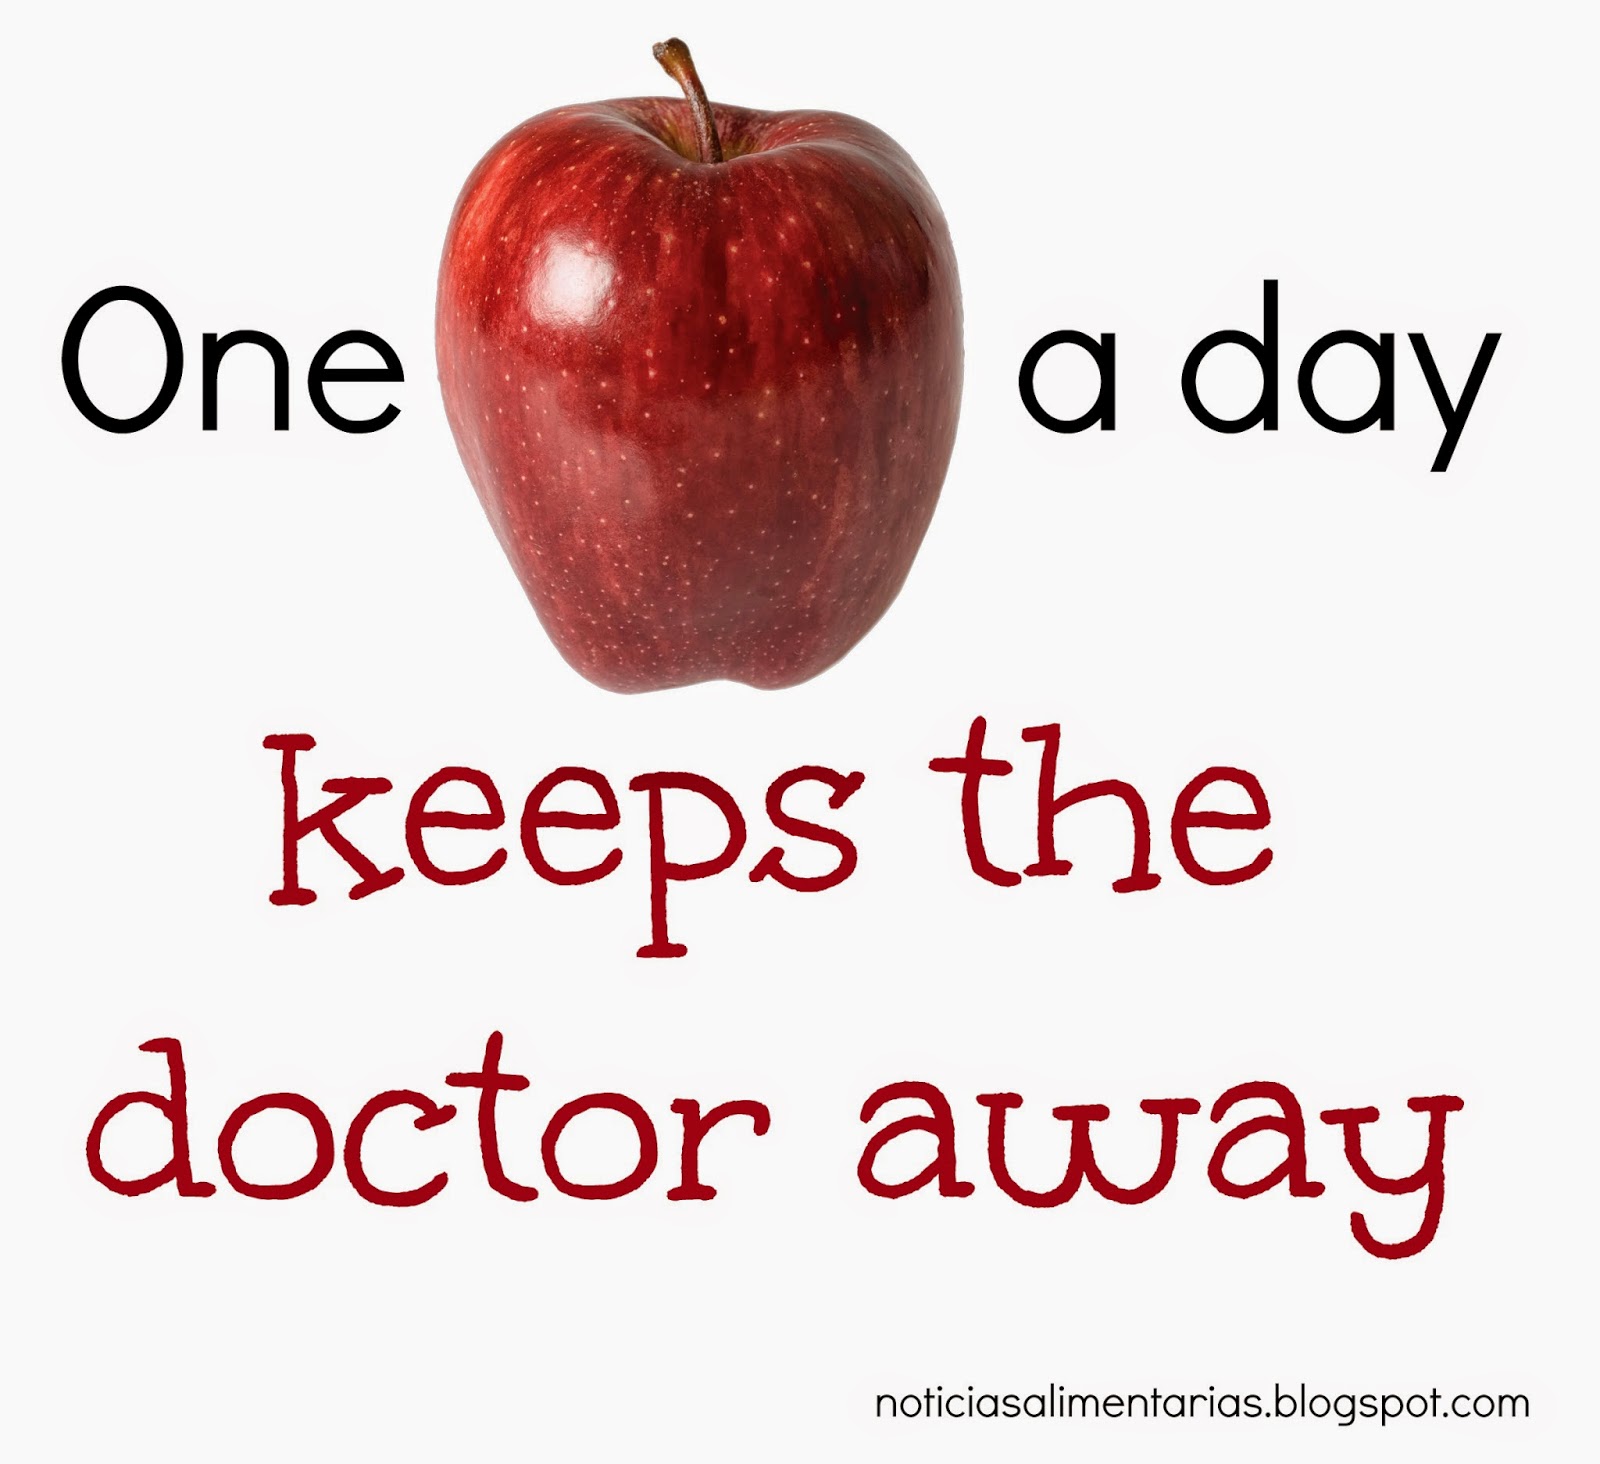 An apple a day keeps the away. An Apple a Day keeps the Doctor away.